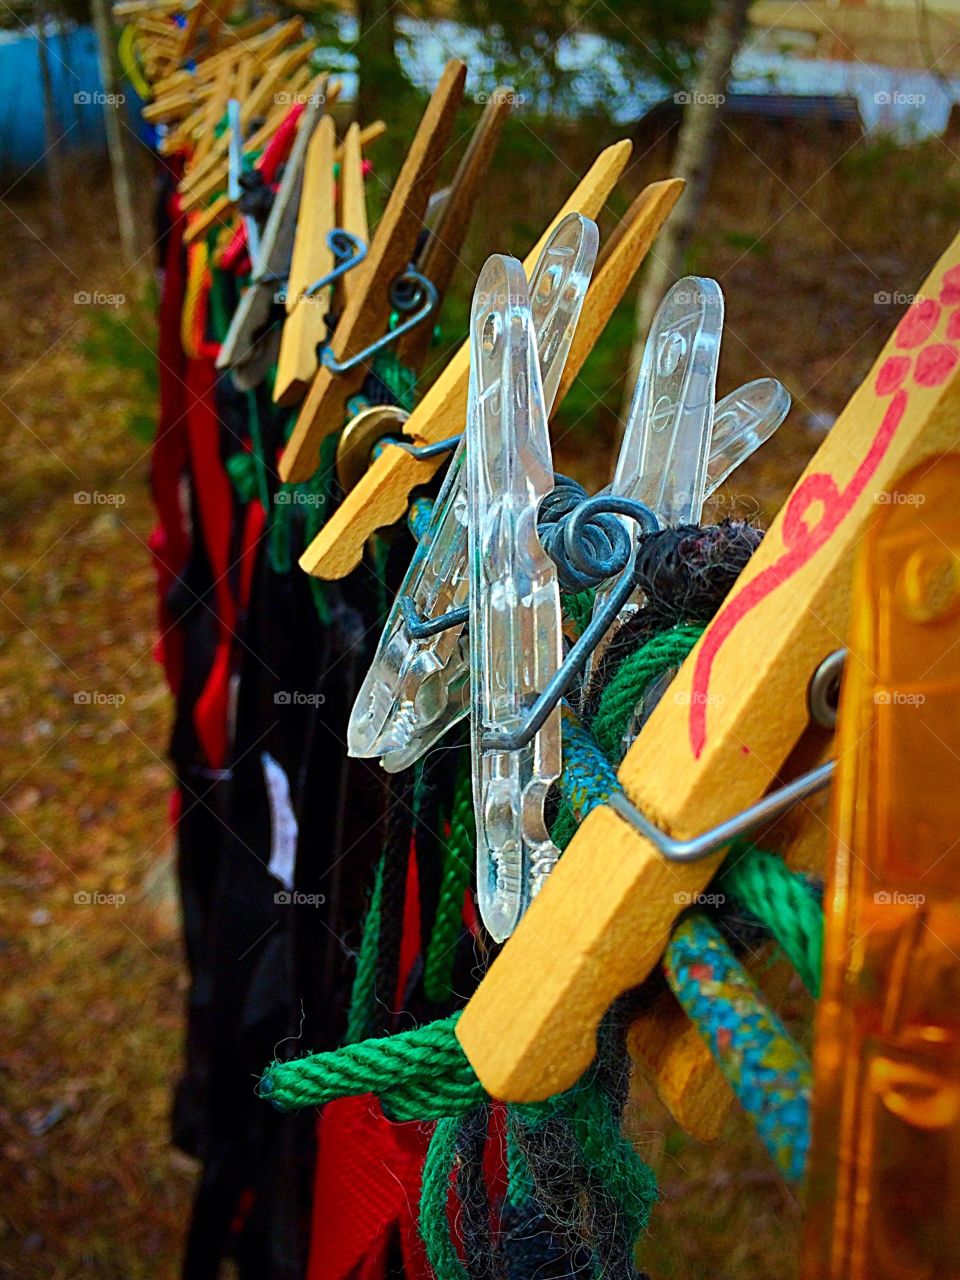 Hanging dog harnesses after a long season of dog sledding. They needed the washing.